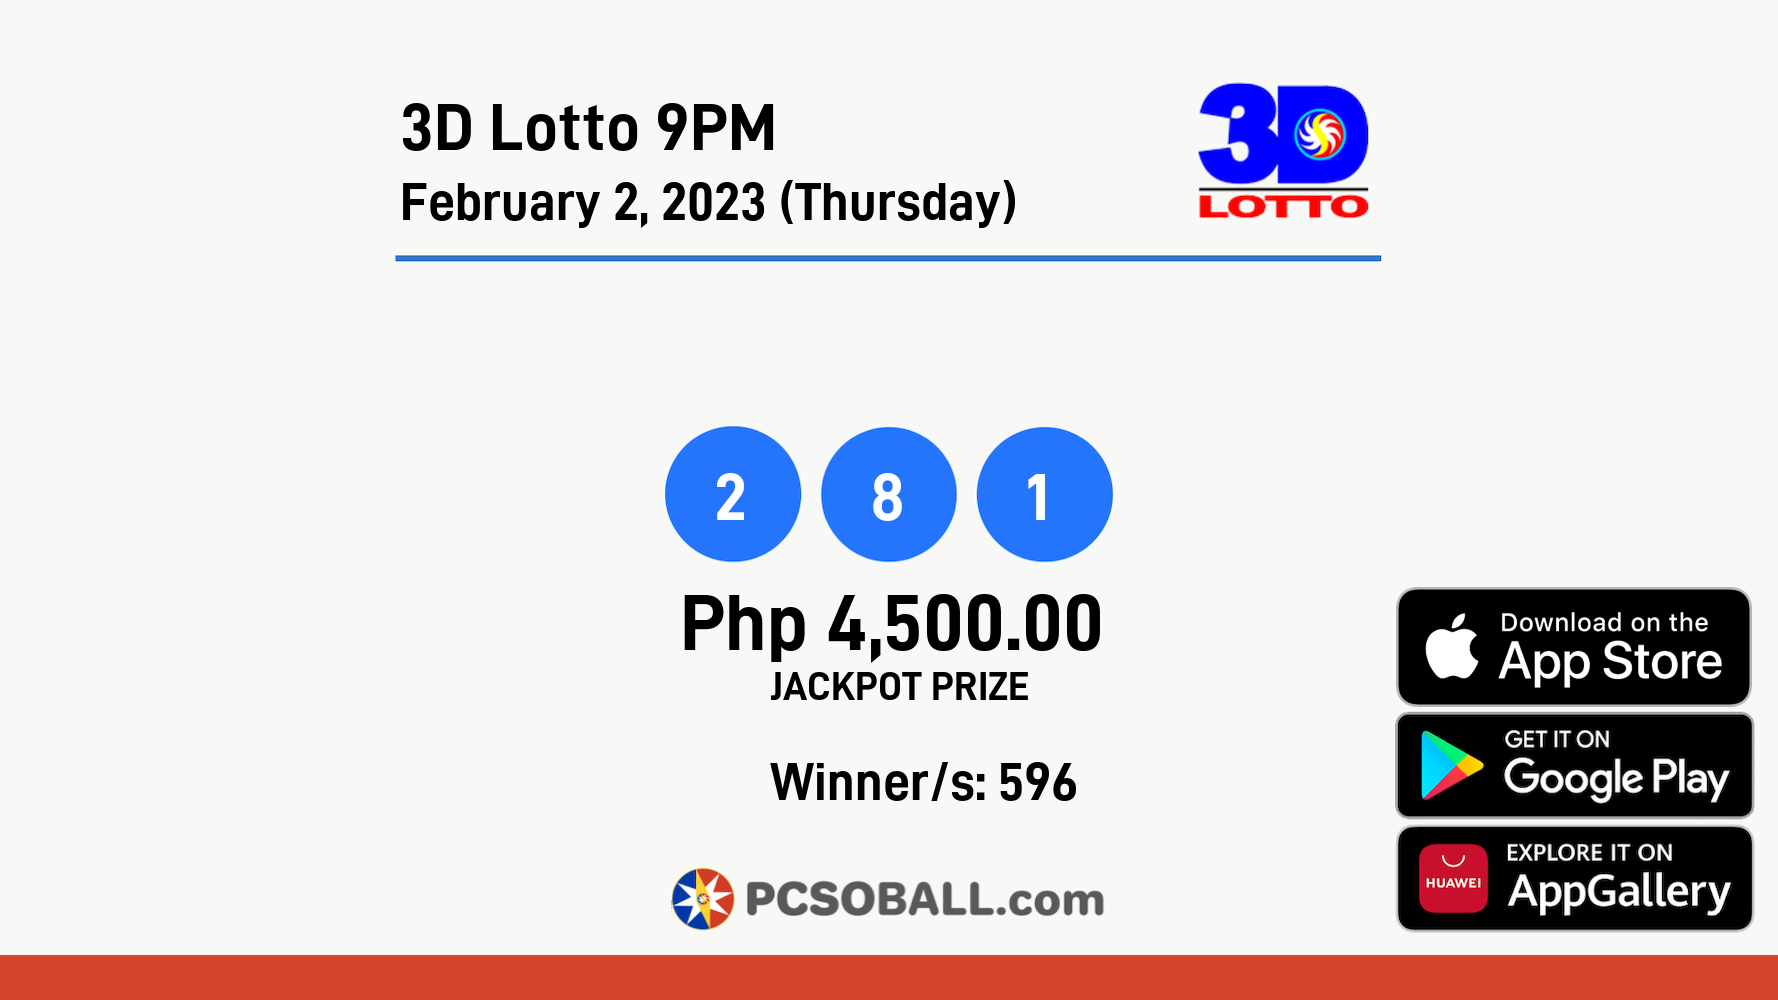 3D Lotto 9PM February 2, 2023 (Thursday) Result